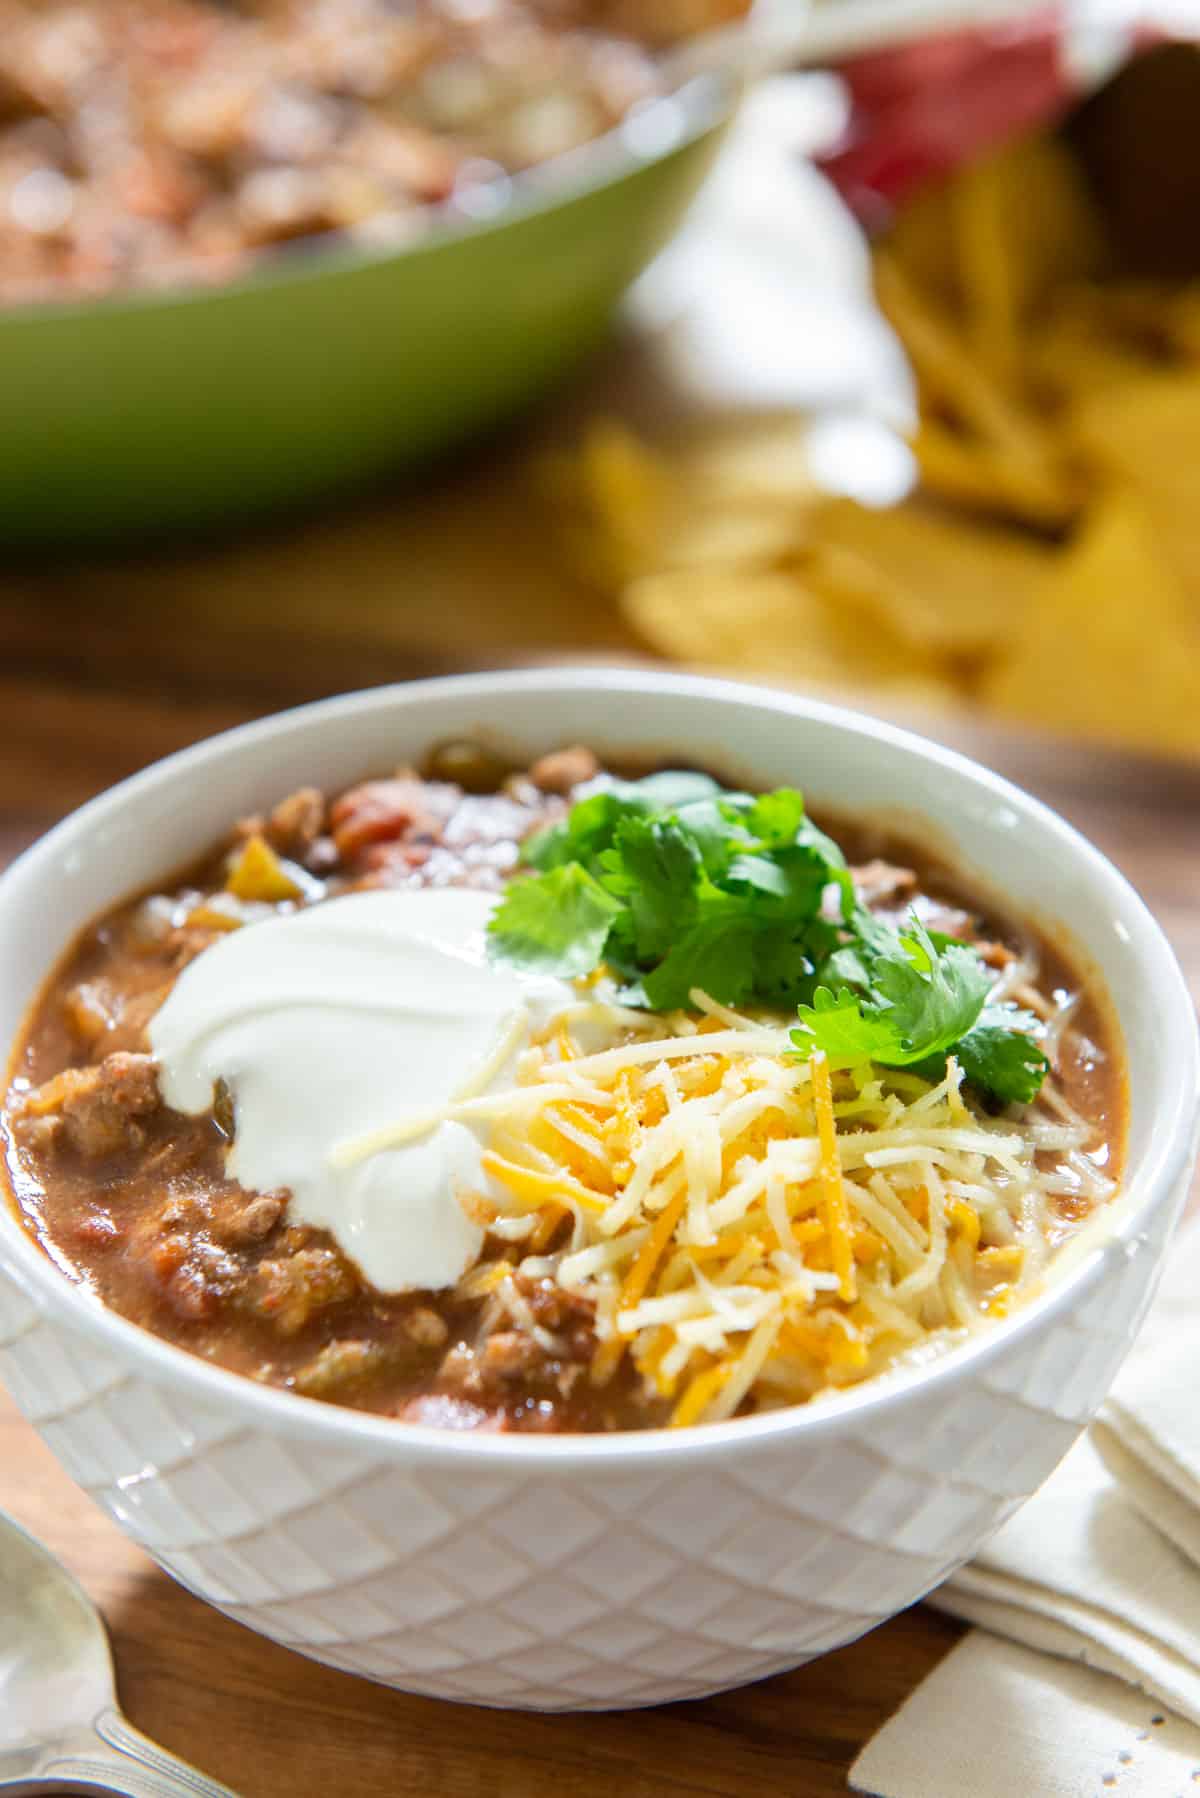 The Best Turkey Chili Recipe - Tastes Better From Scratch